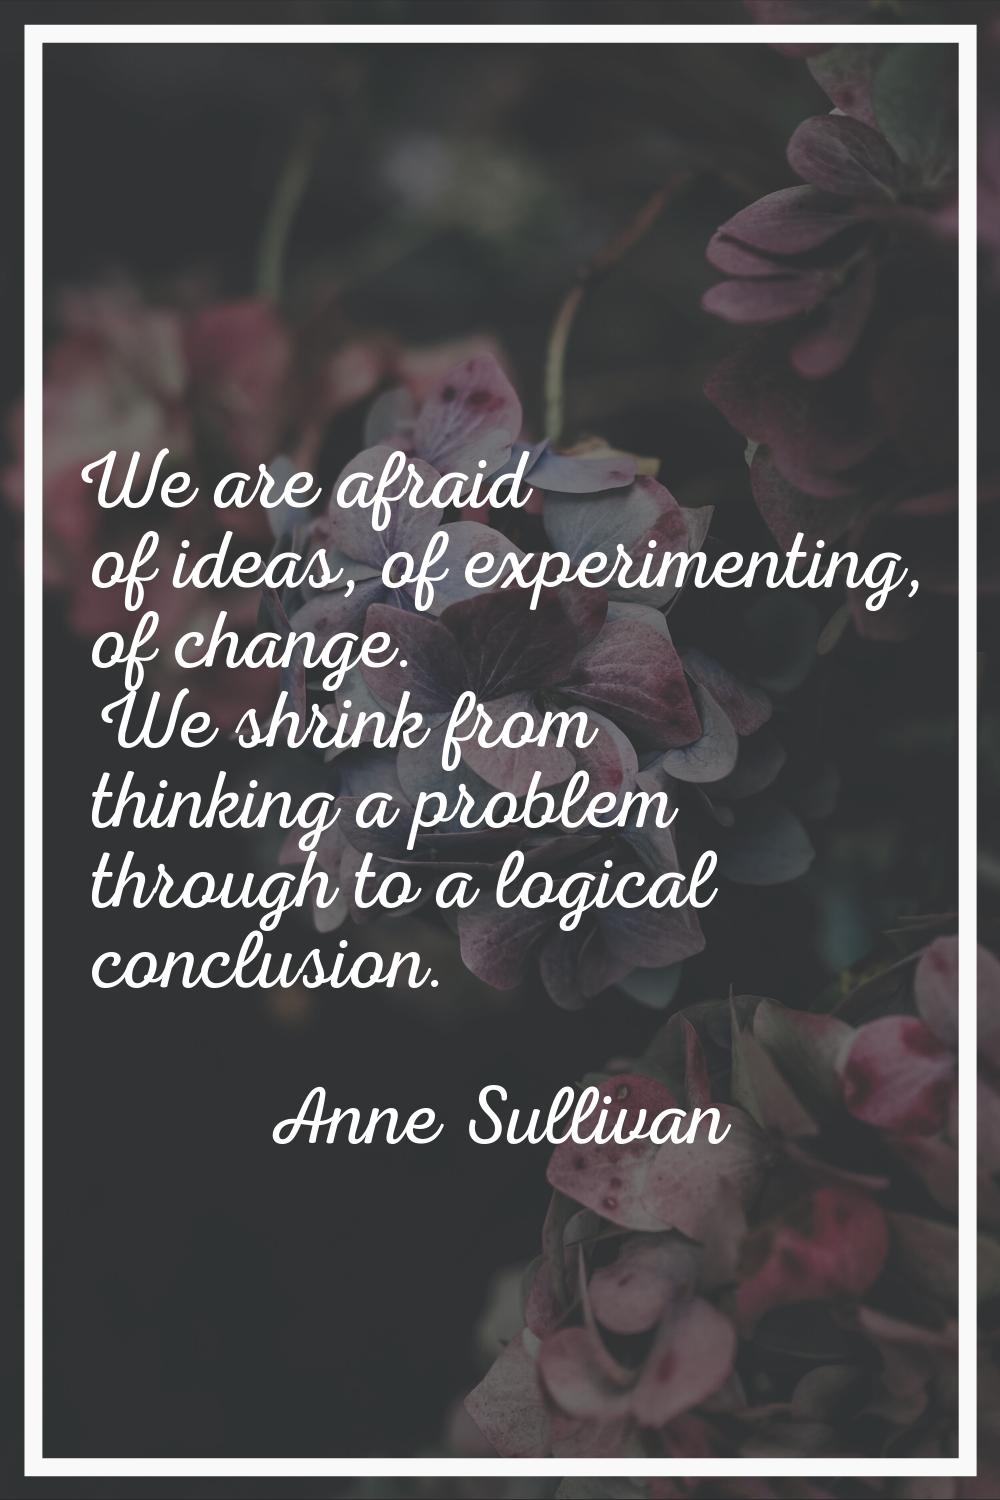 We are afraid of ideas, of experimenting, of change. We shrink from thinking a problem through to a